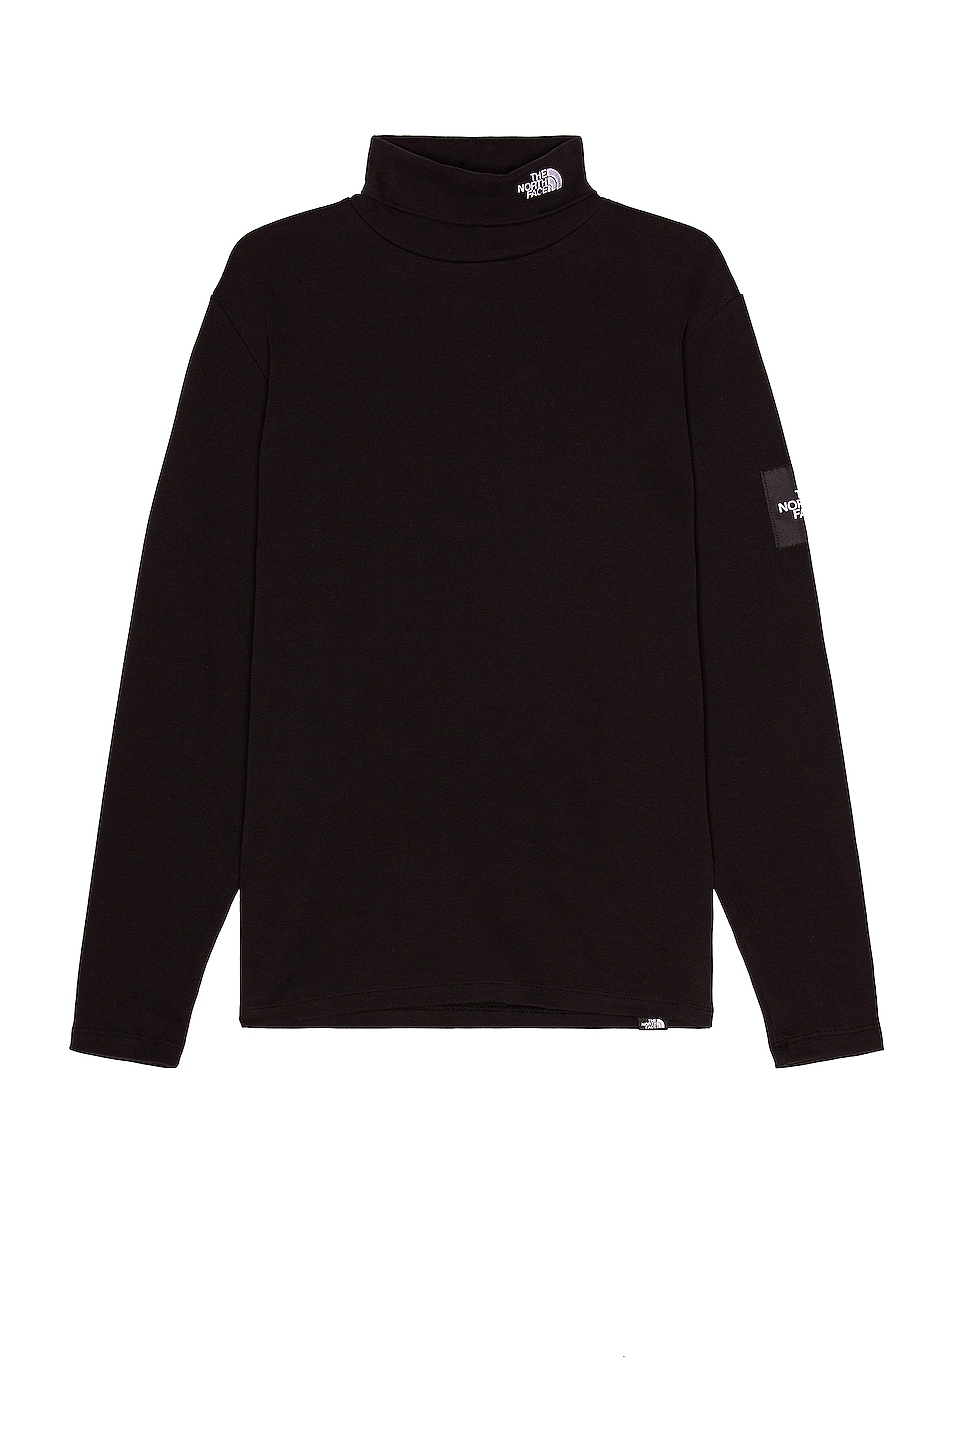 Image 1 of The North Face Black Box Last Dance Tee in TNF Black